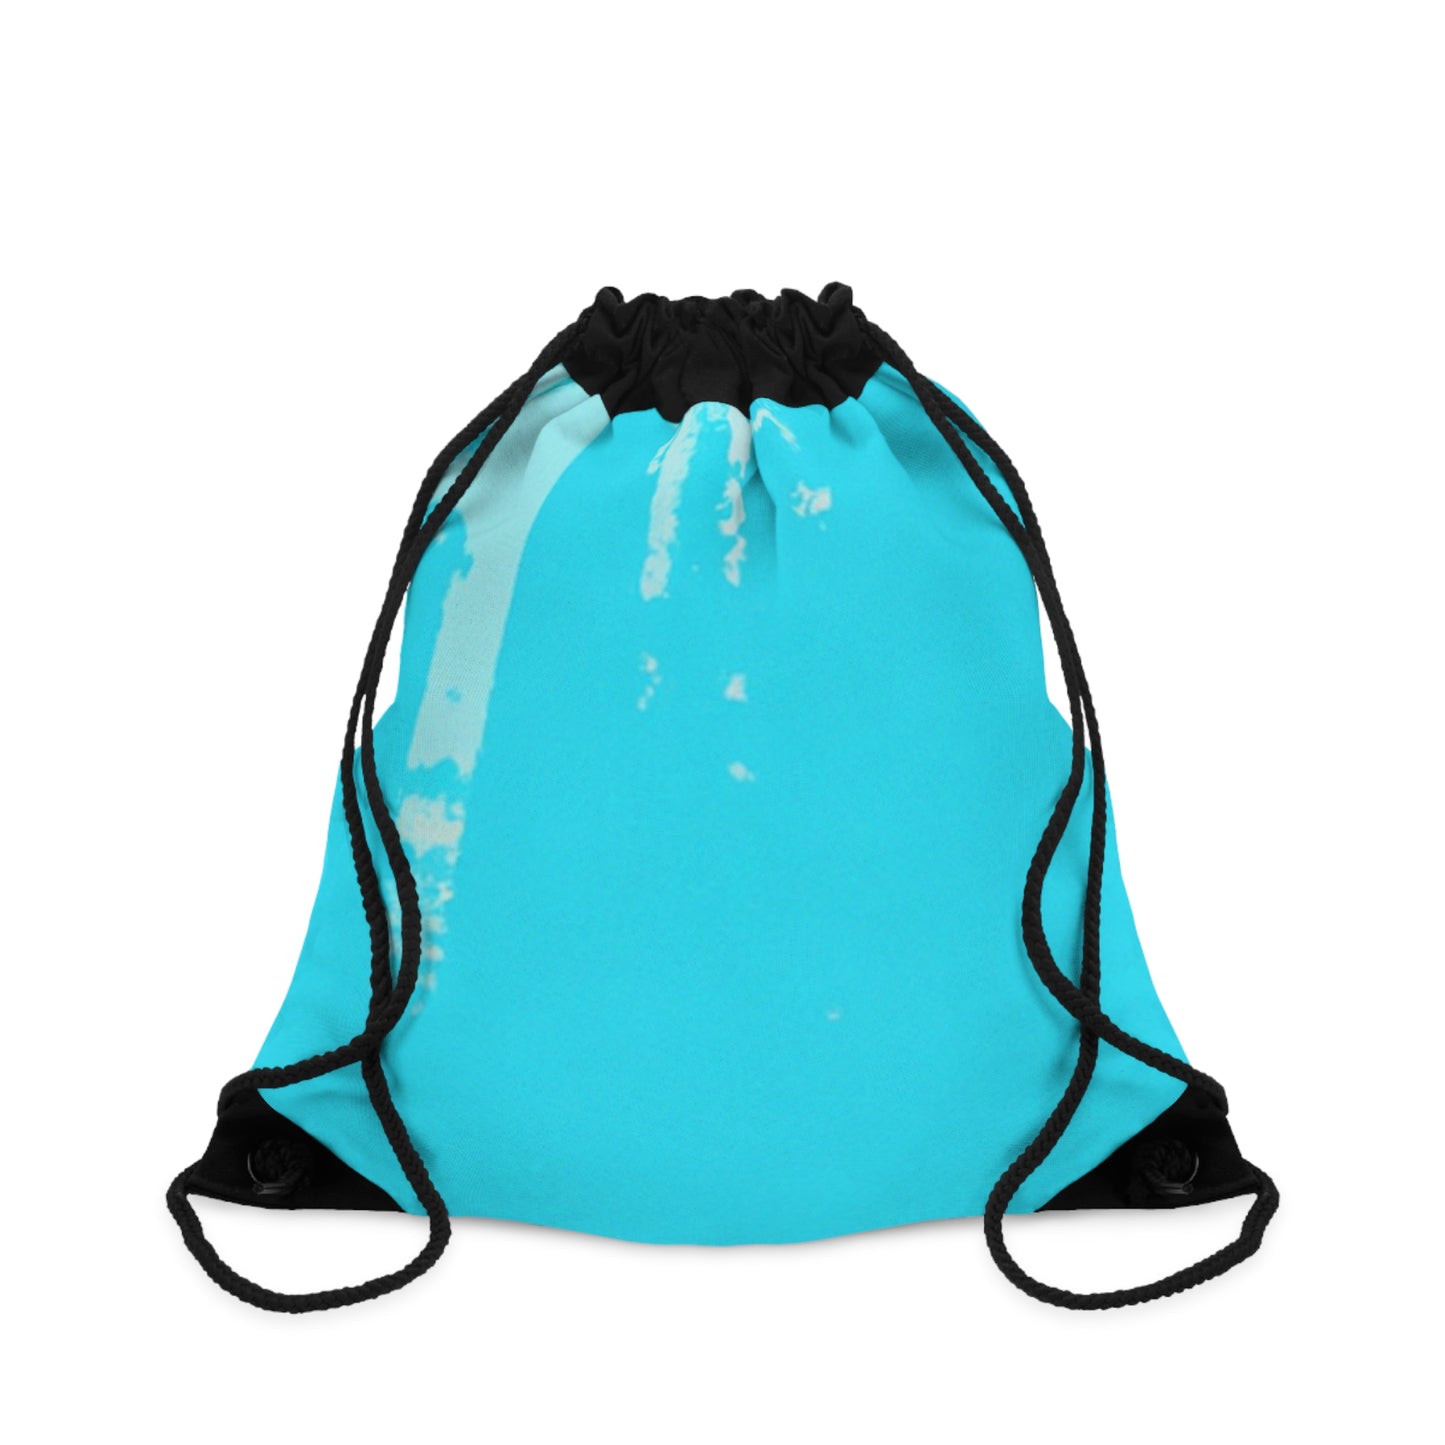 "A Breezy Skyscape: A Combination of Tradition and Modernity"- The Alien Drawstring Bag